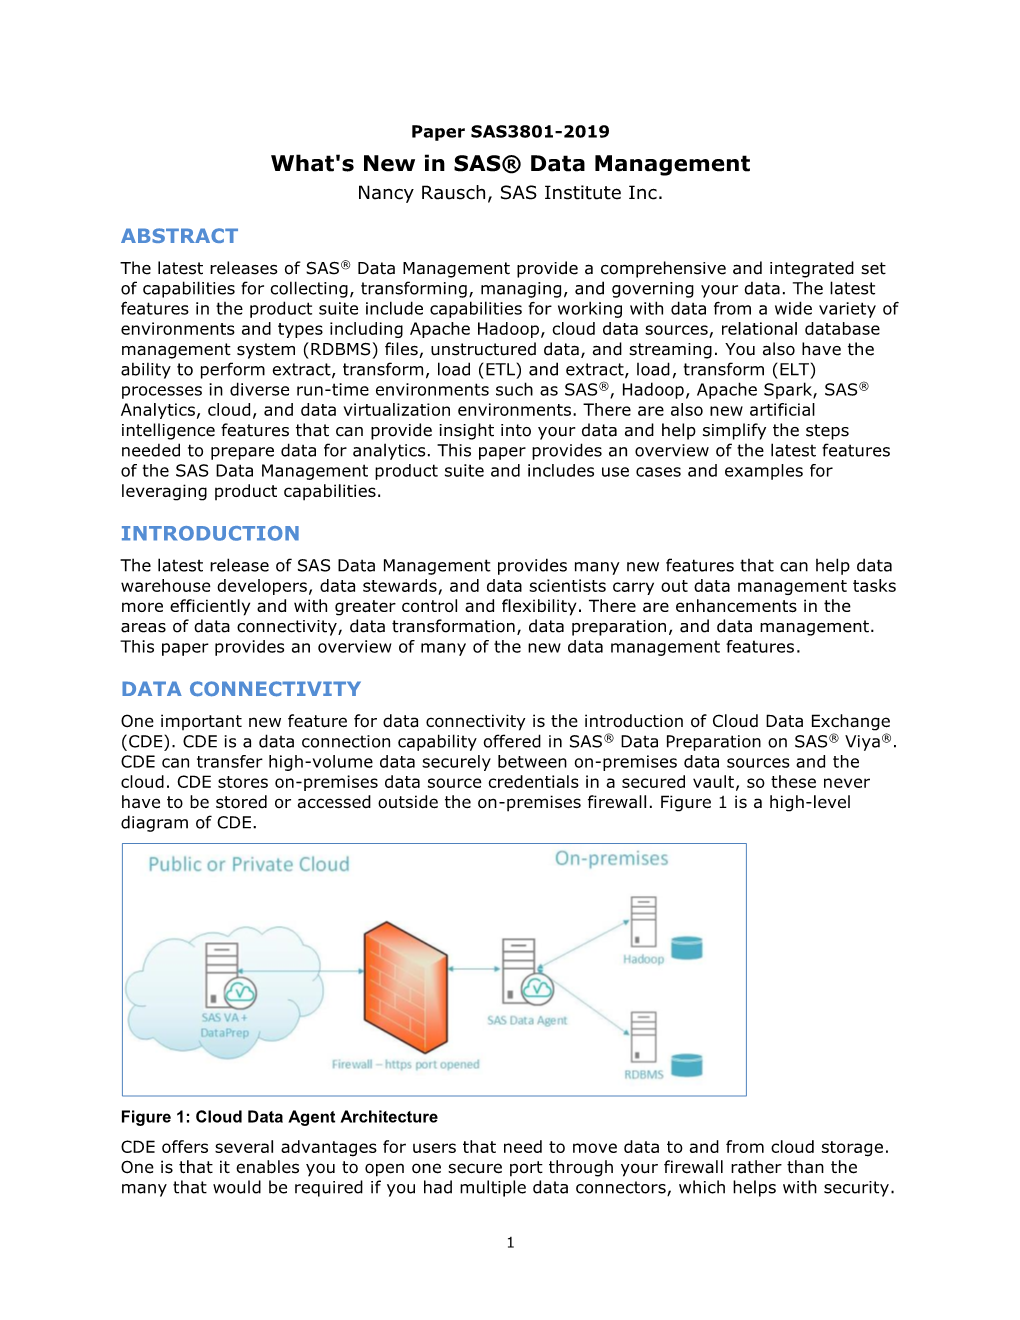 Whats New in SAS Data Management